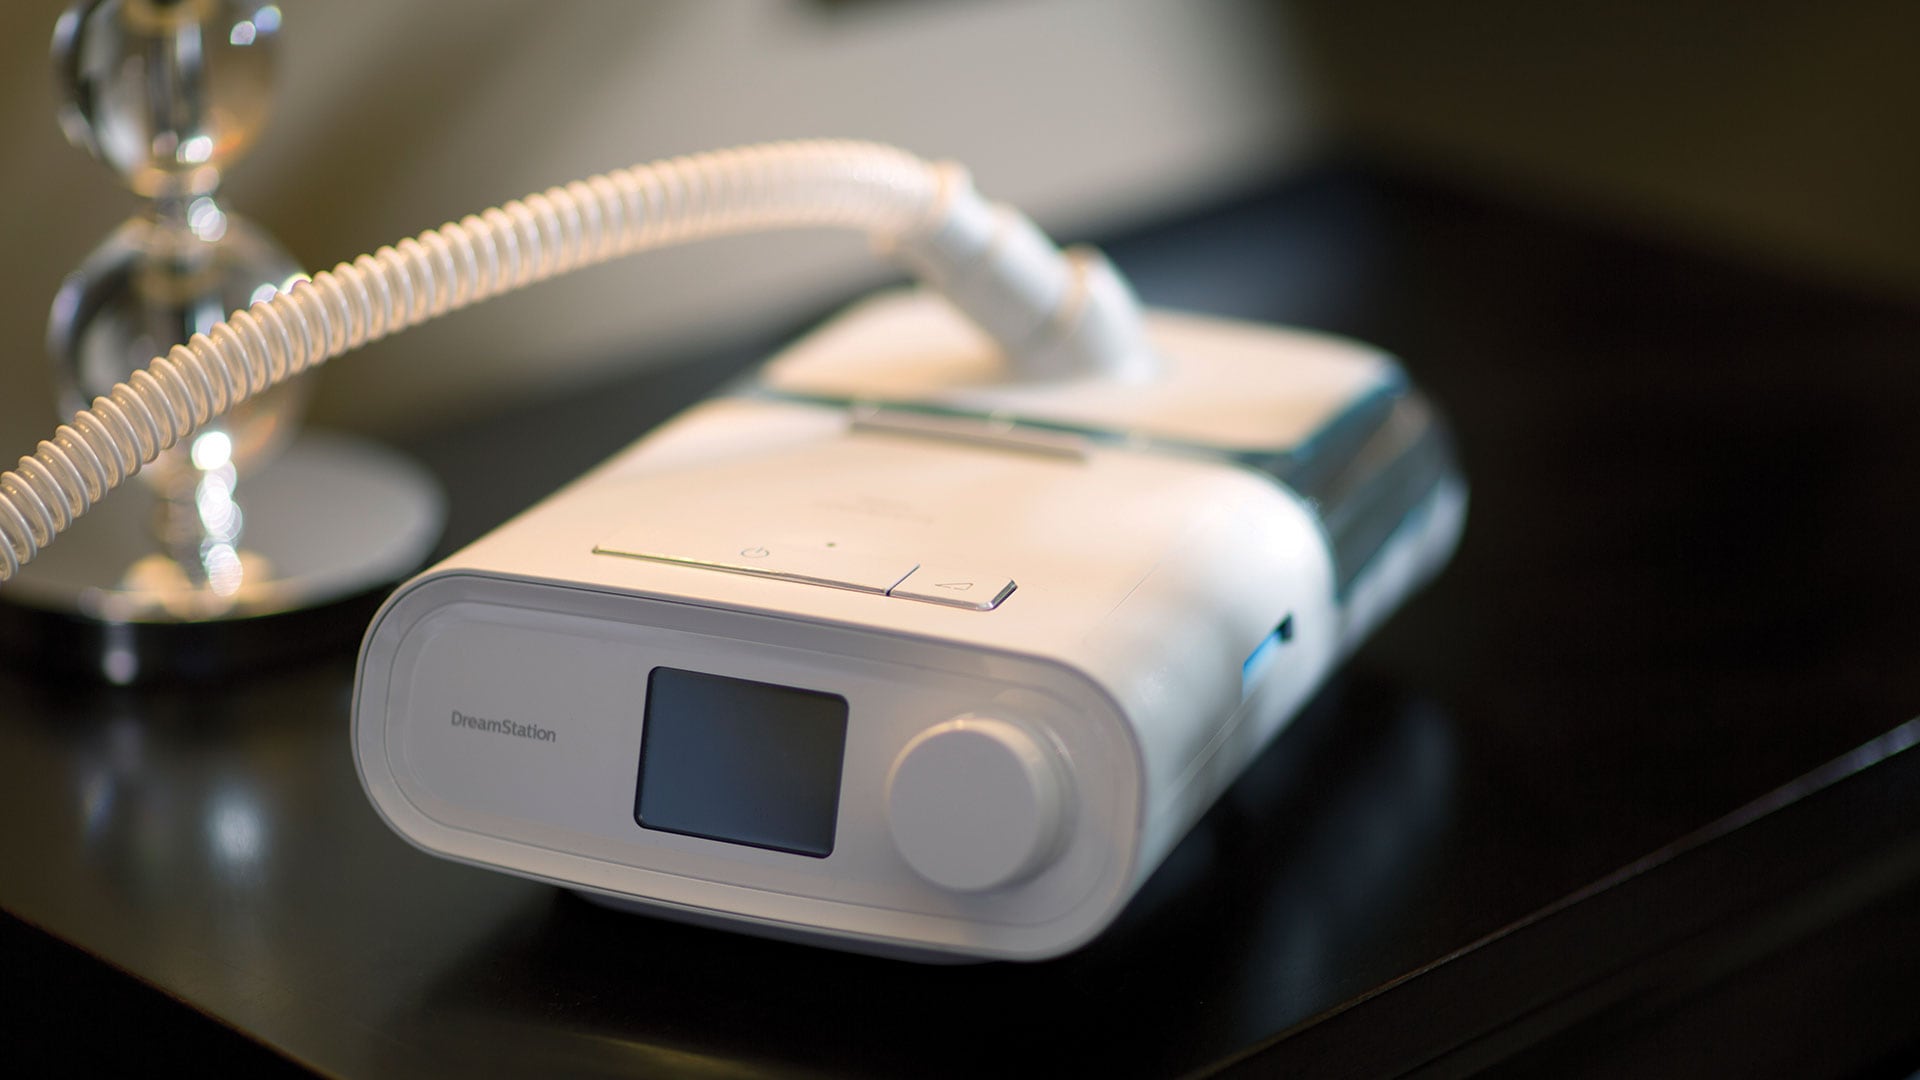 Philips Respironics - PE-PUR testing results and conclusions available to date